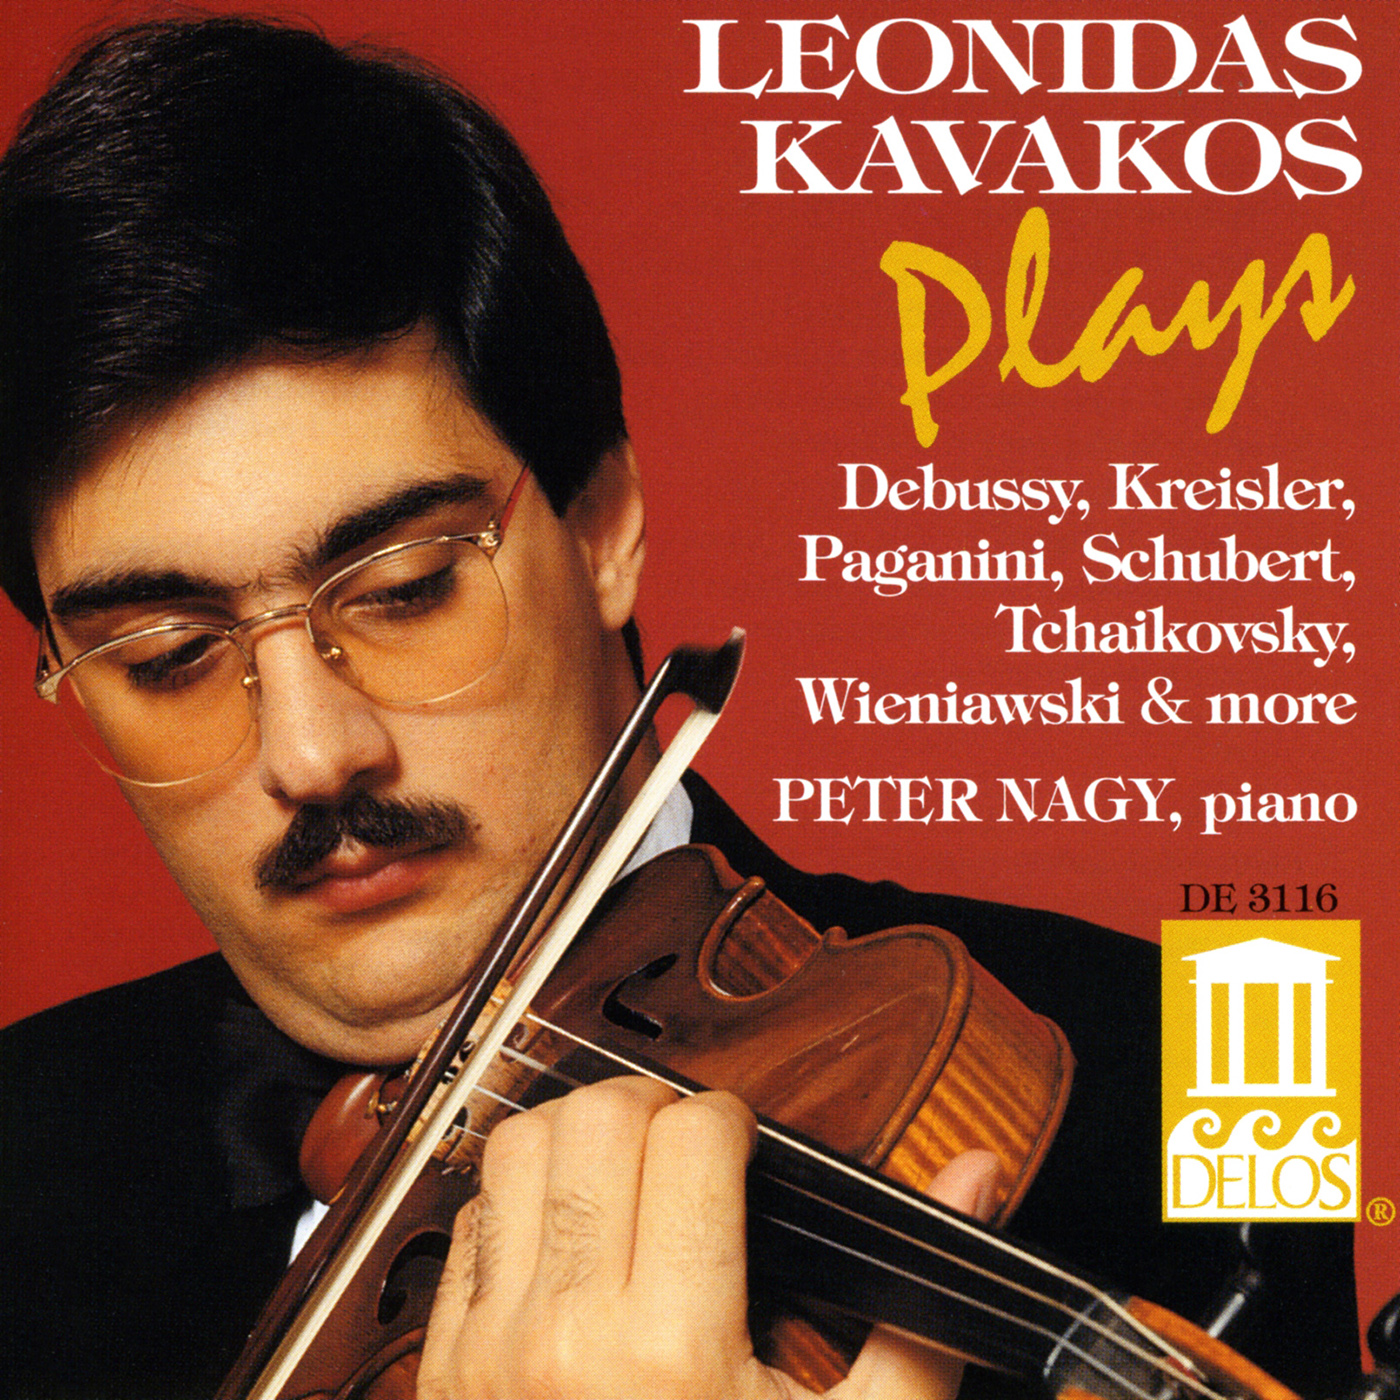 Polonaise No. 1 in D Major, Op. 4 (version for violin and piano): Polonaise No. 1 in D Major, Op. 4